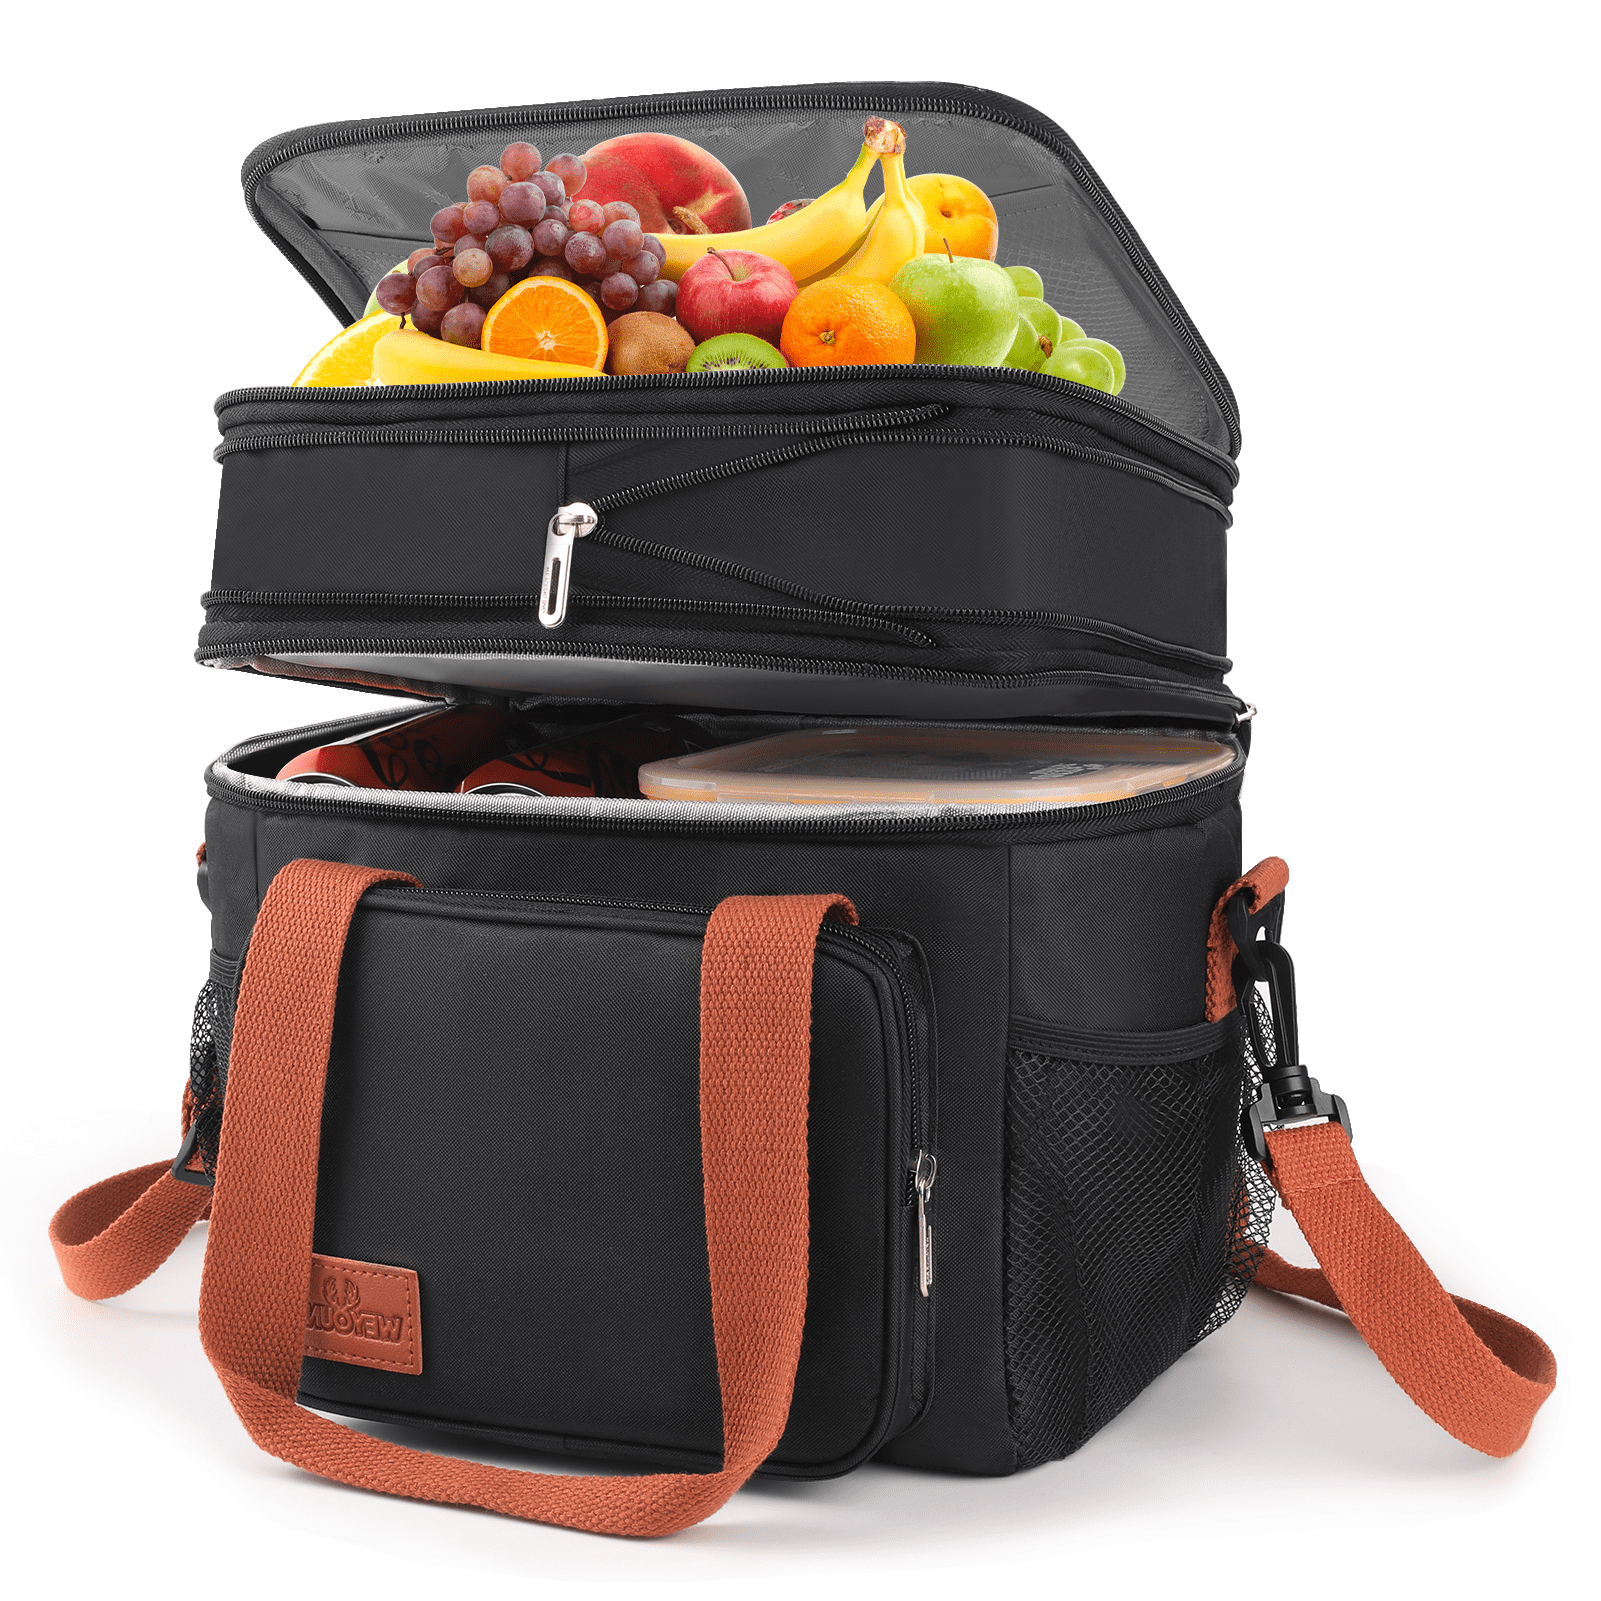  Lunch Bags for Women Men, Rose Insulated Lunch Box Black and  Red Roses Reusable Cooler Lunch Tote Bag for Girls Boys School Work Office  Picnic Travel: Home & Kitchen